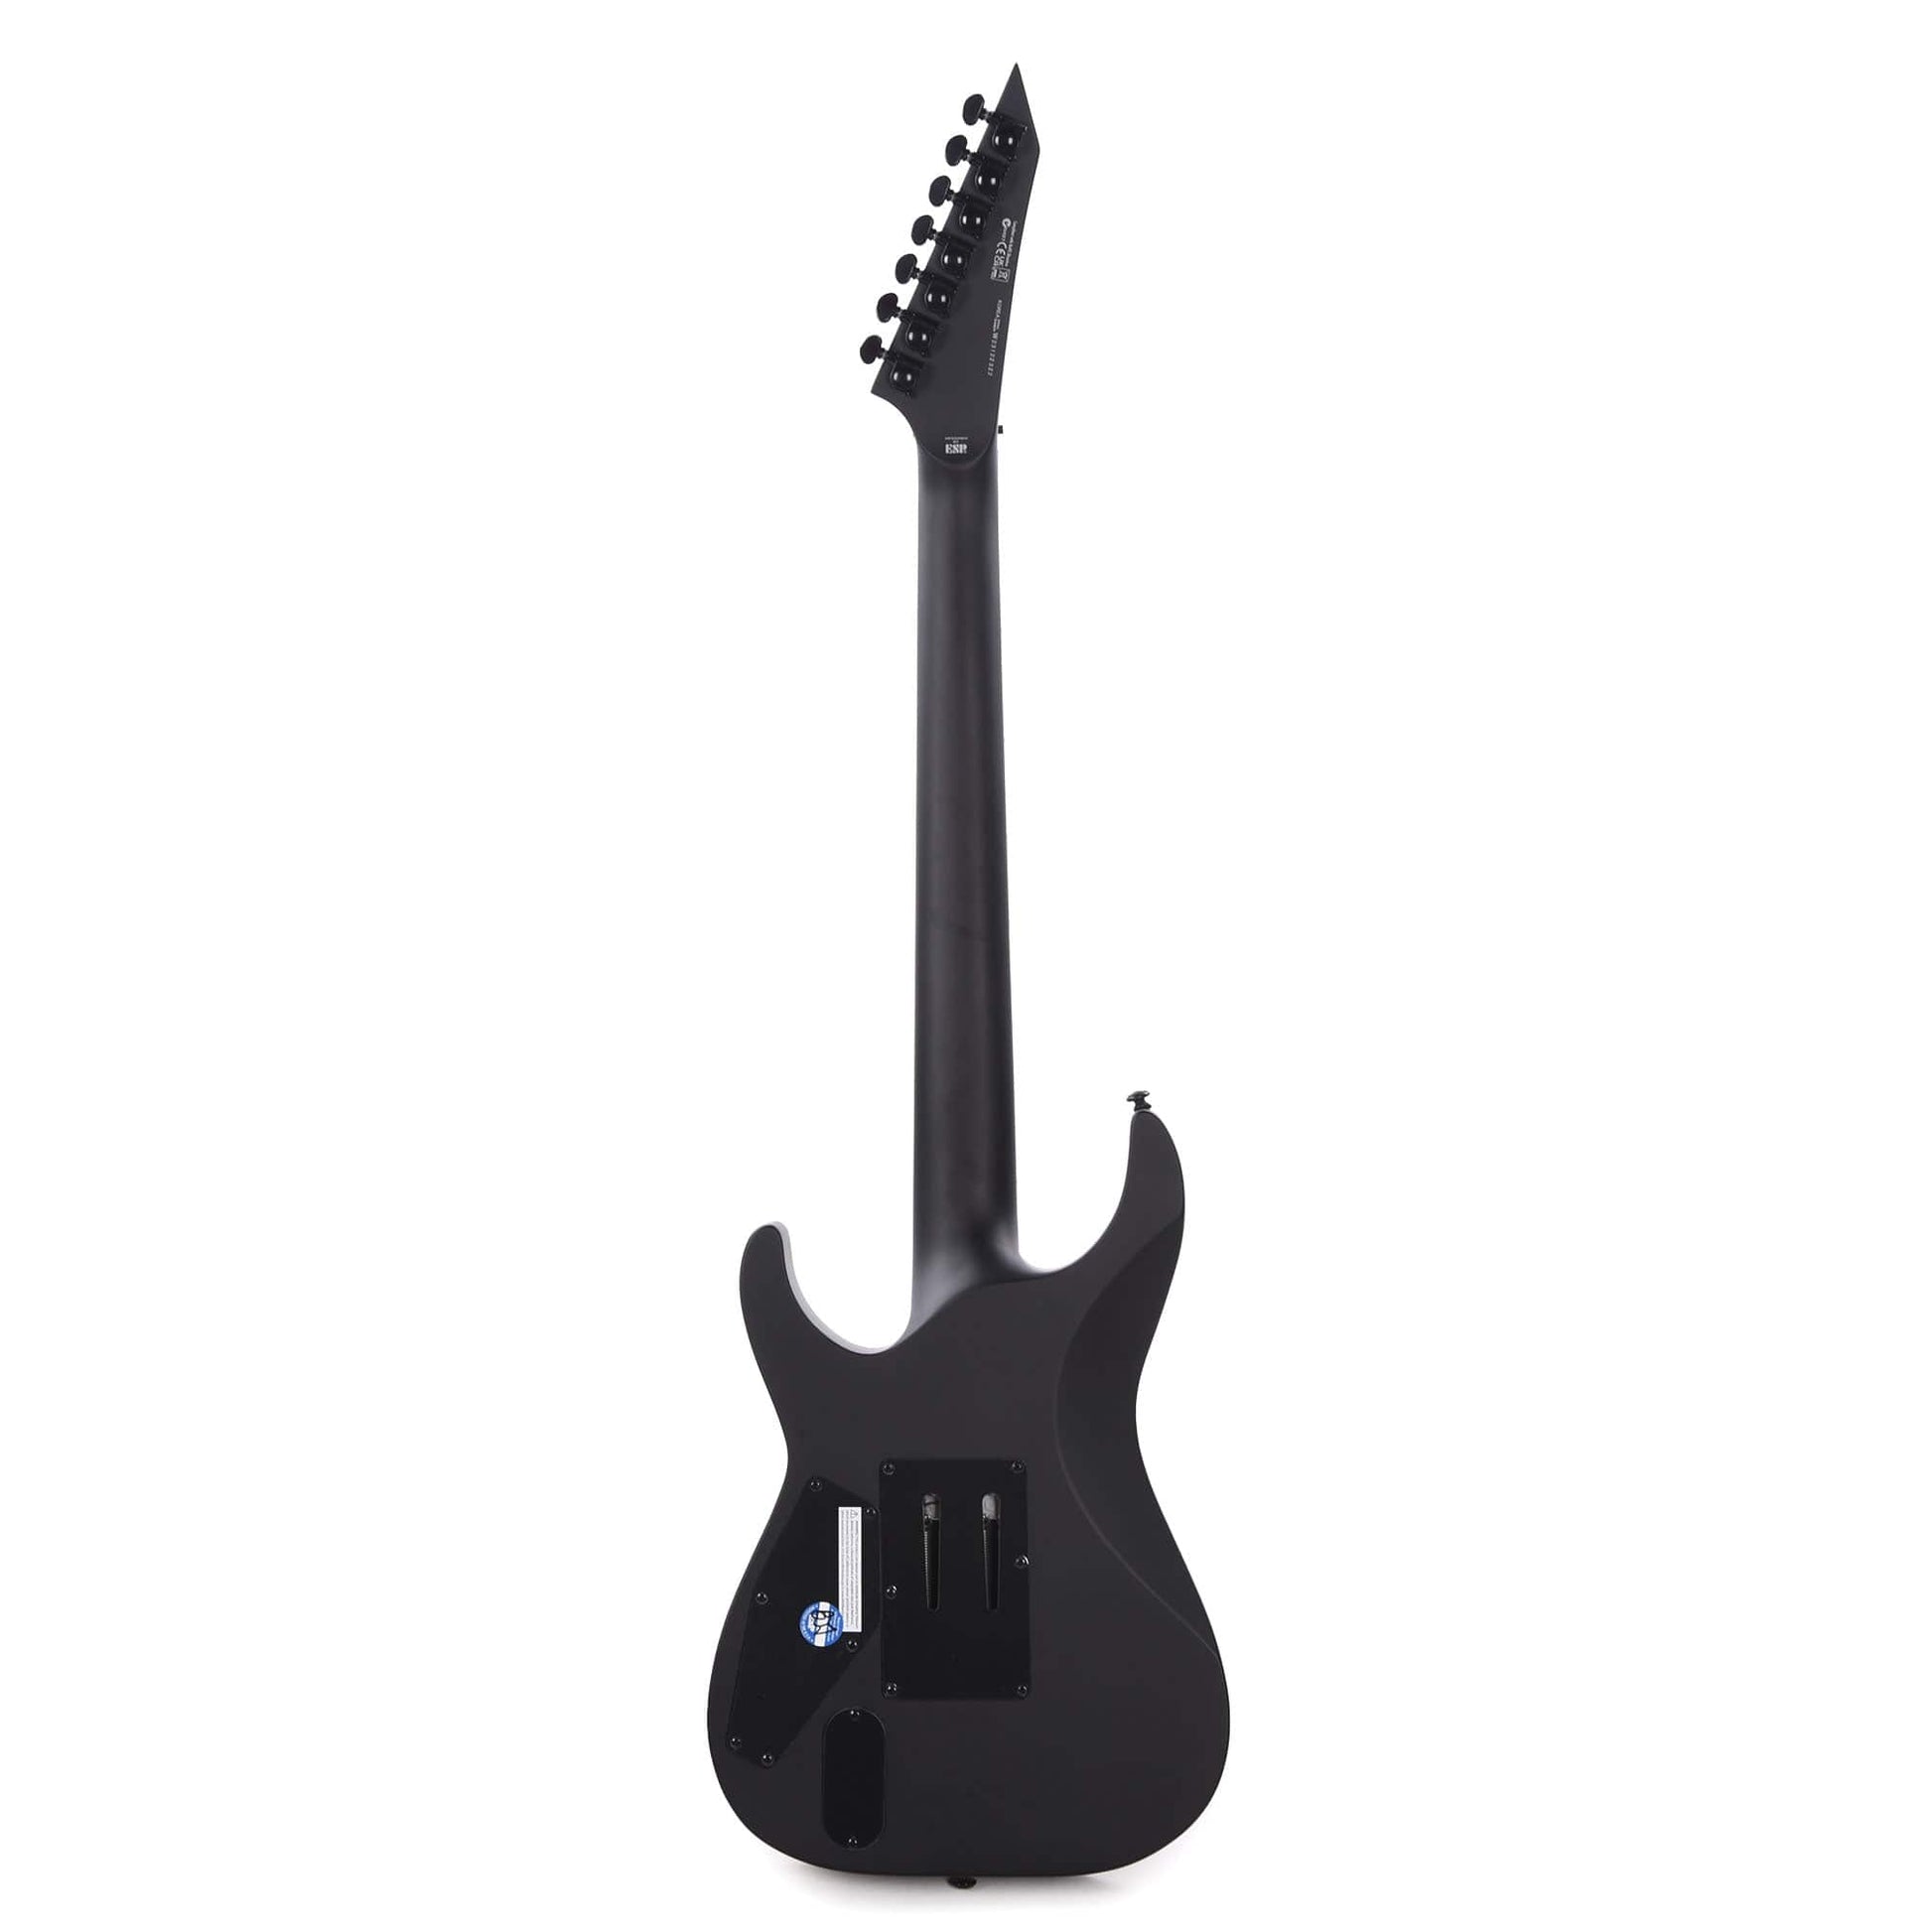 ESP LTD M-1007B Baritone Charcoal Burst Satin 7-String w/ Quilted Maple Top Electric Guitars / Solid Body